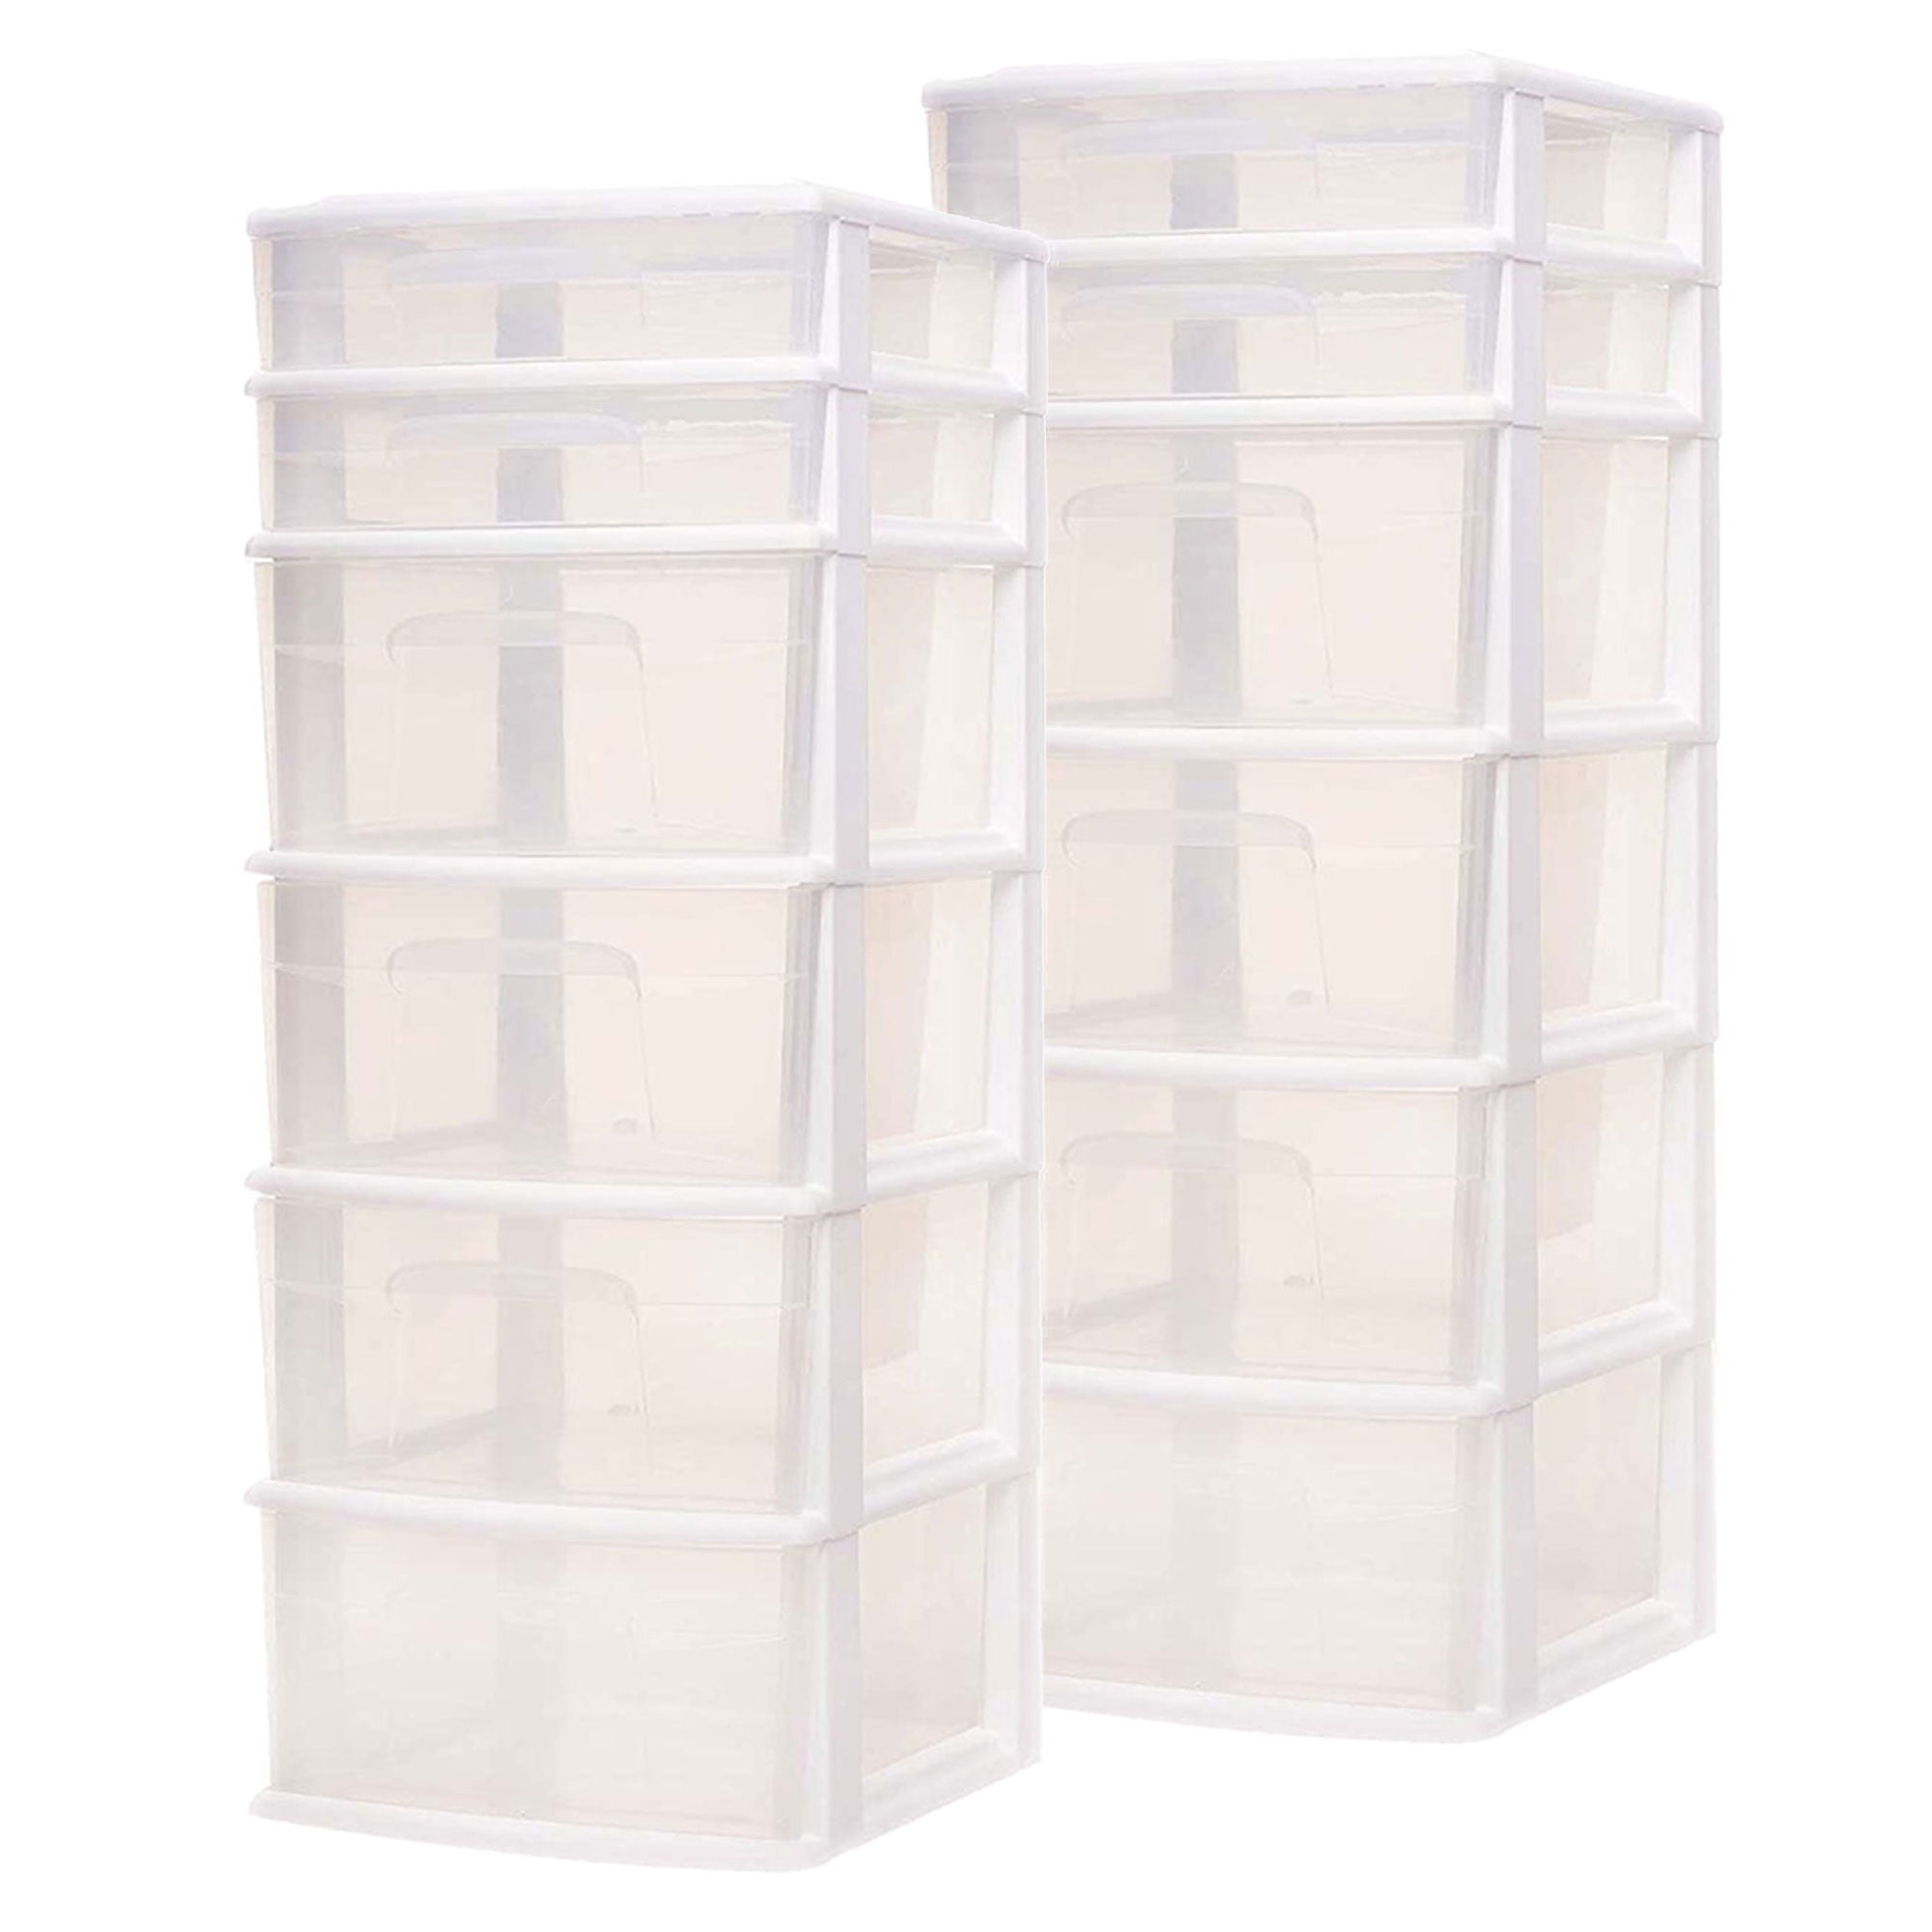 Homz 6 Drawer Plastic Storage and Organizer Tower, Cabinet for Home,  Office, Classroom, Craft, Art Supplies, Clothes, White Frame/Clear Drawers